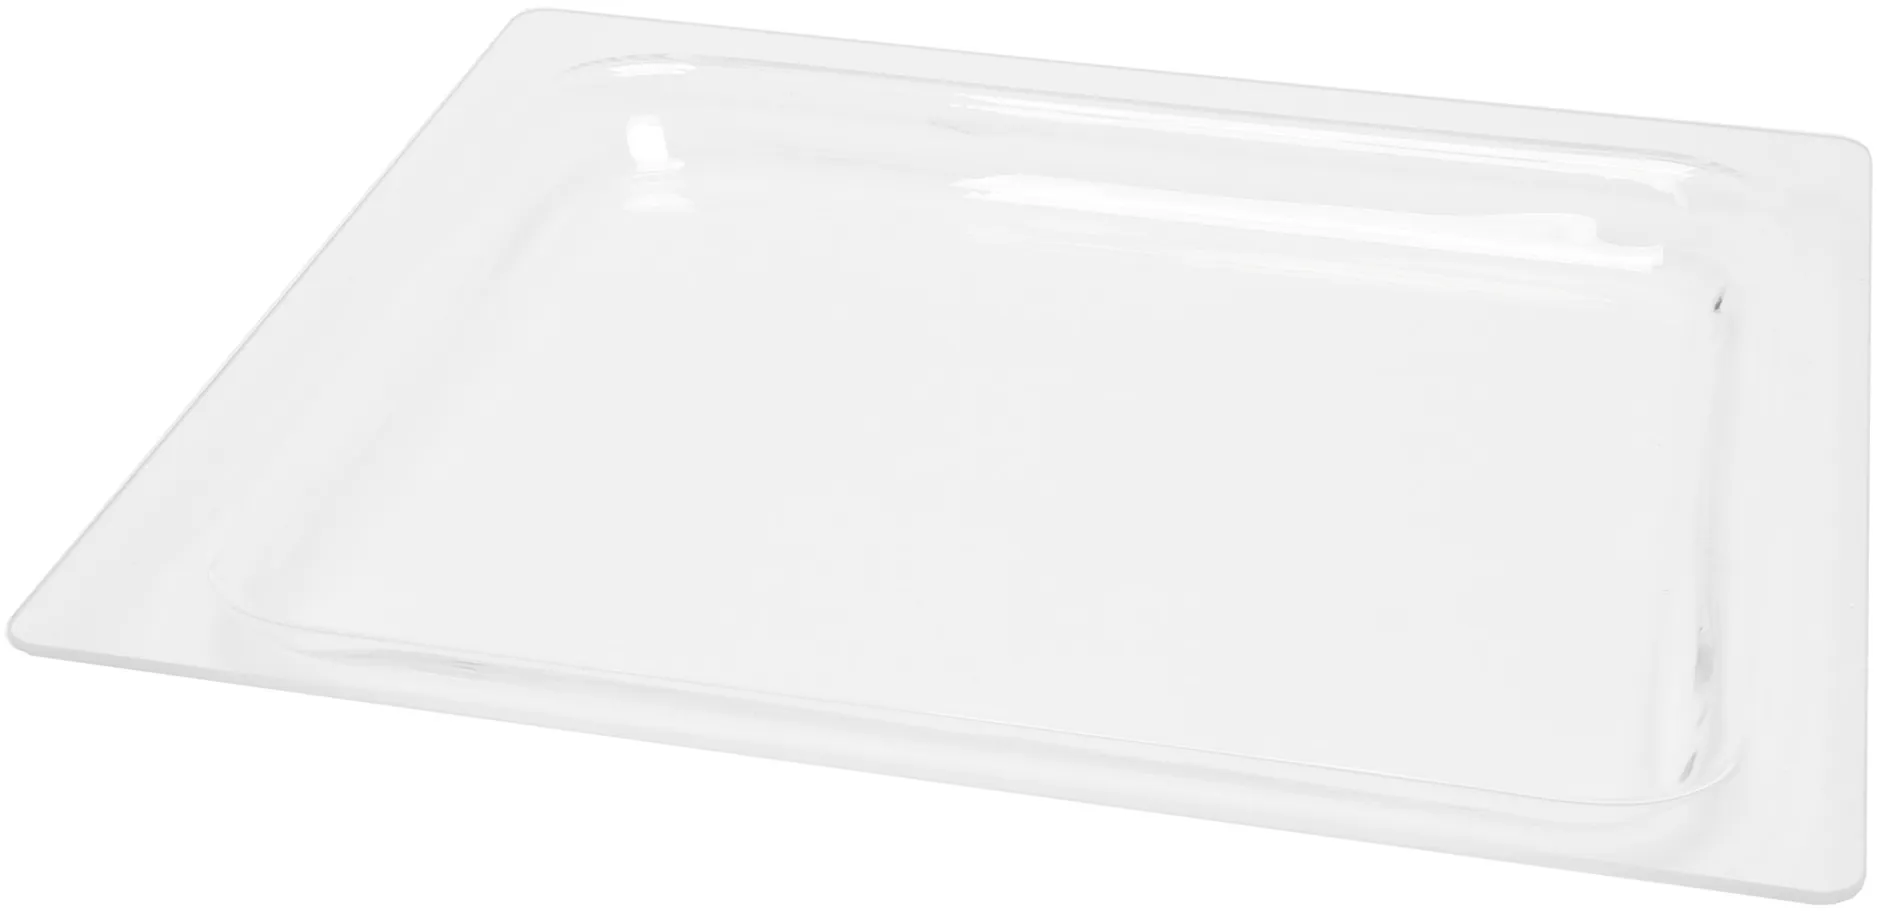 Small Glass Tray 